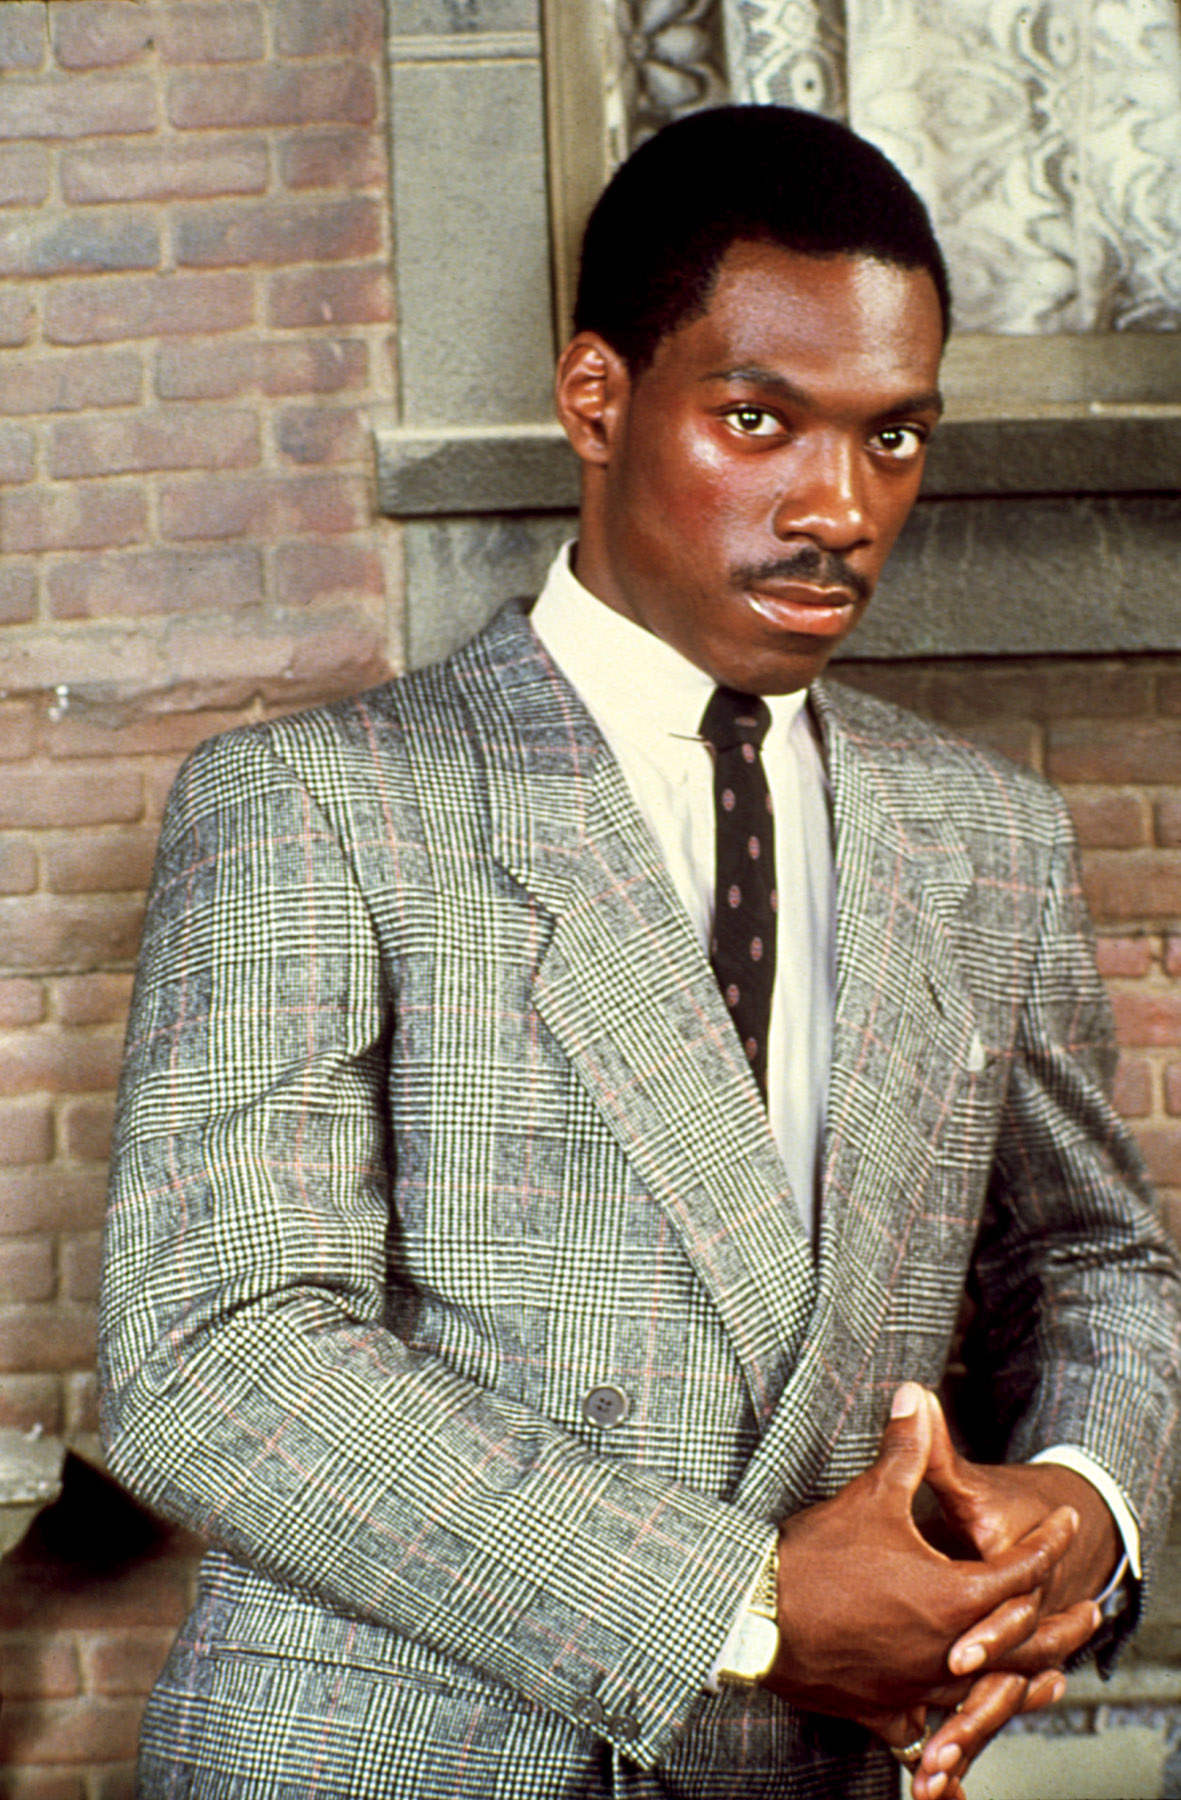 Eddie Murphy in a suit, leaning against a brick wall